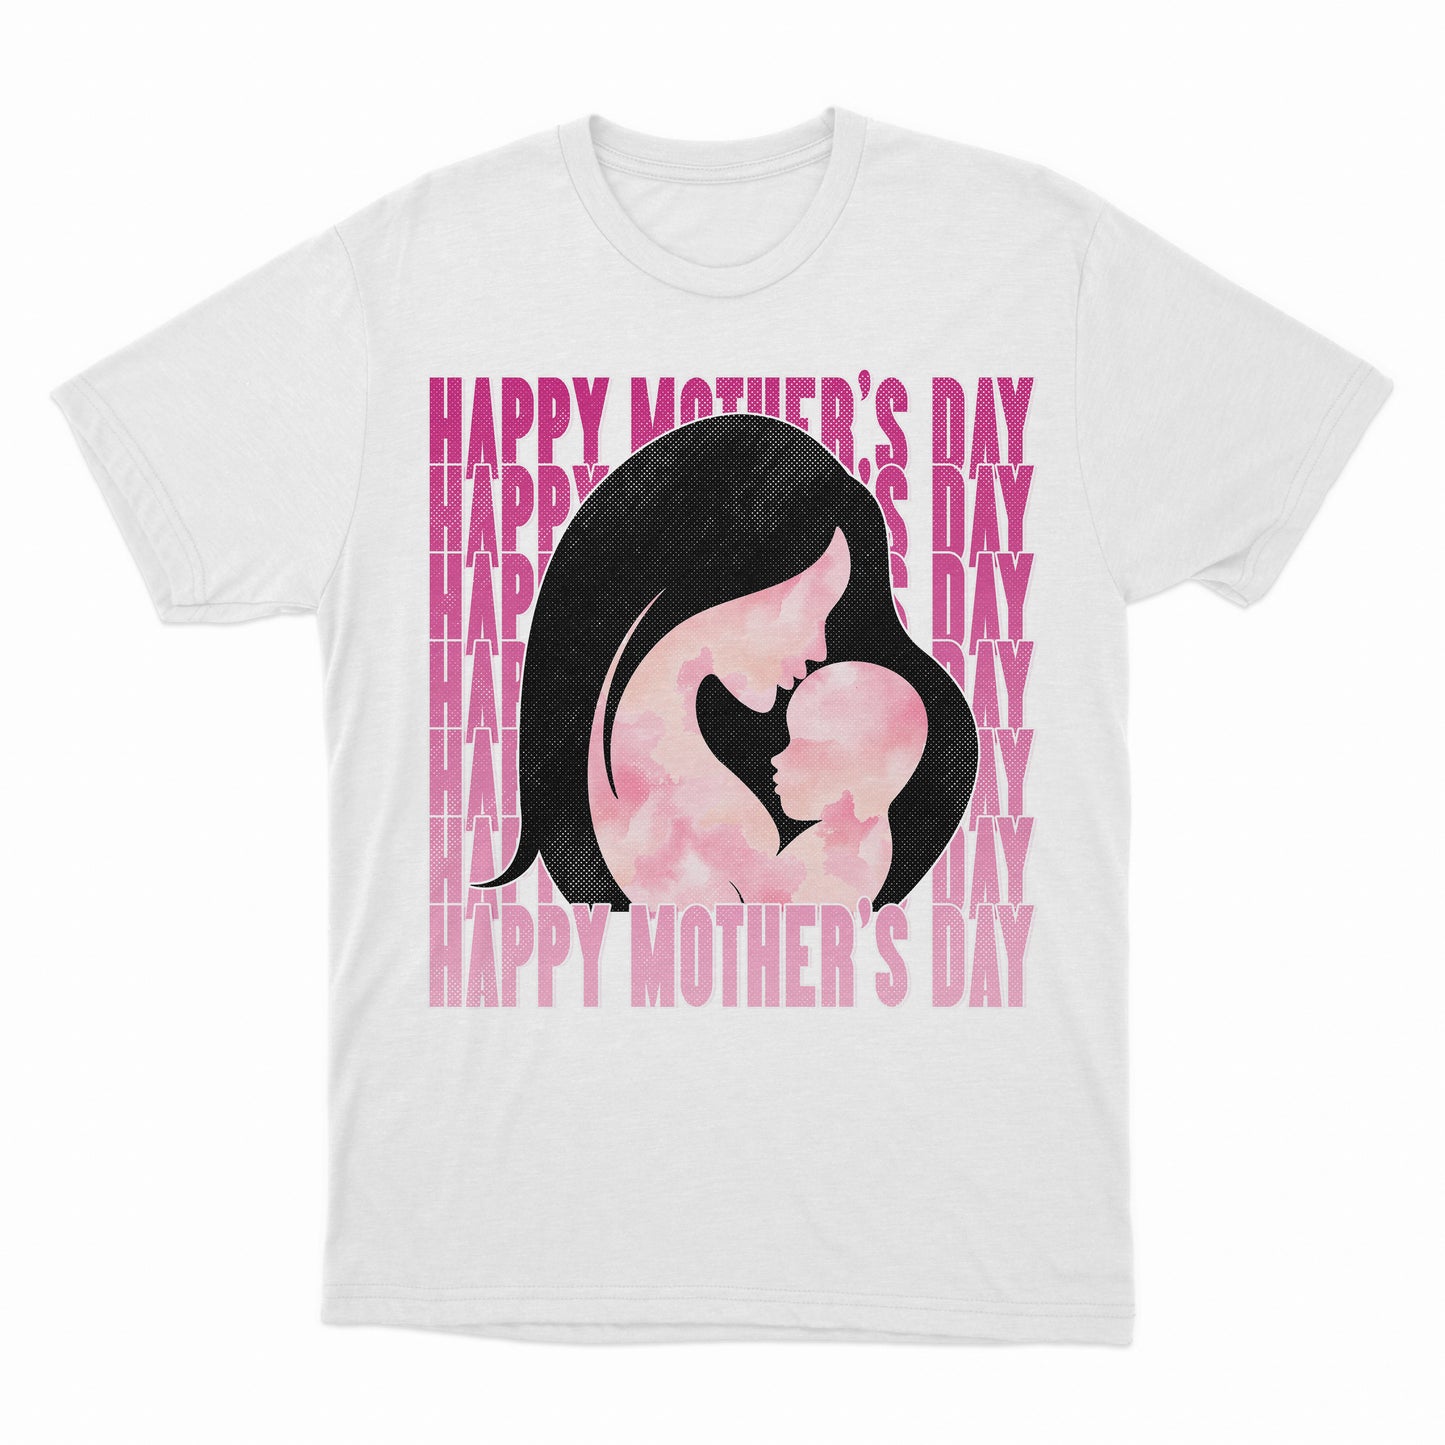 Happy Mother's Day Shirt,  Mother And New Born Line Art, Minimalist Single Line Art Drawing, Watercolor Mother's Day Heart Shirt, Customized Mother's Day Shirt